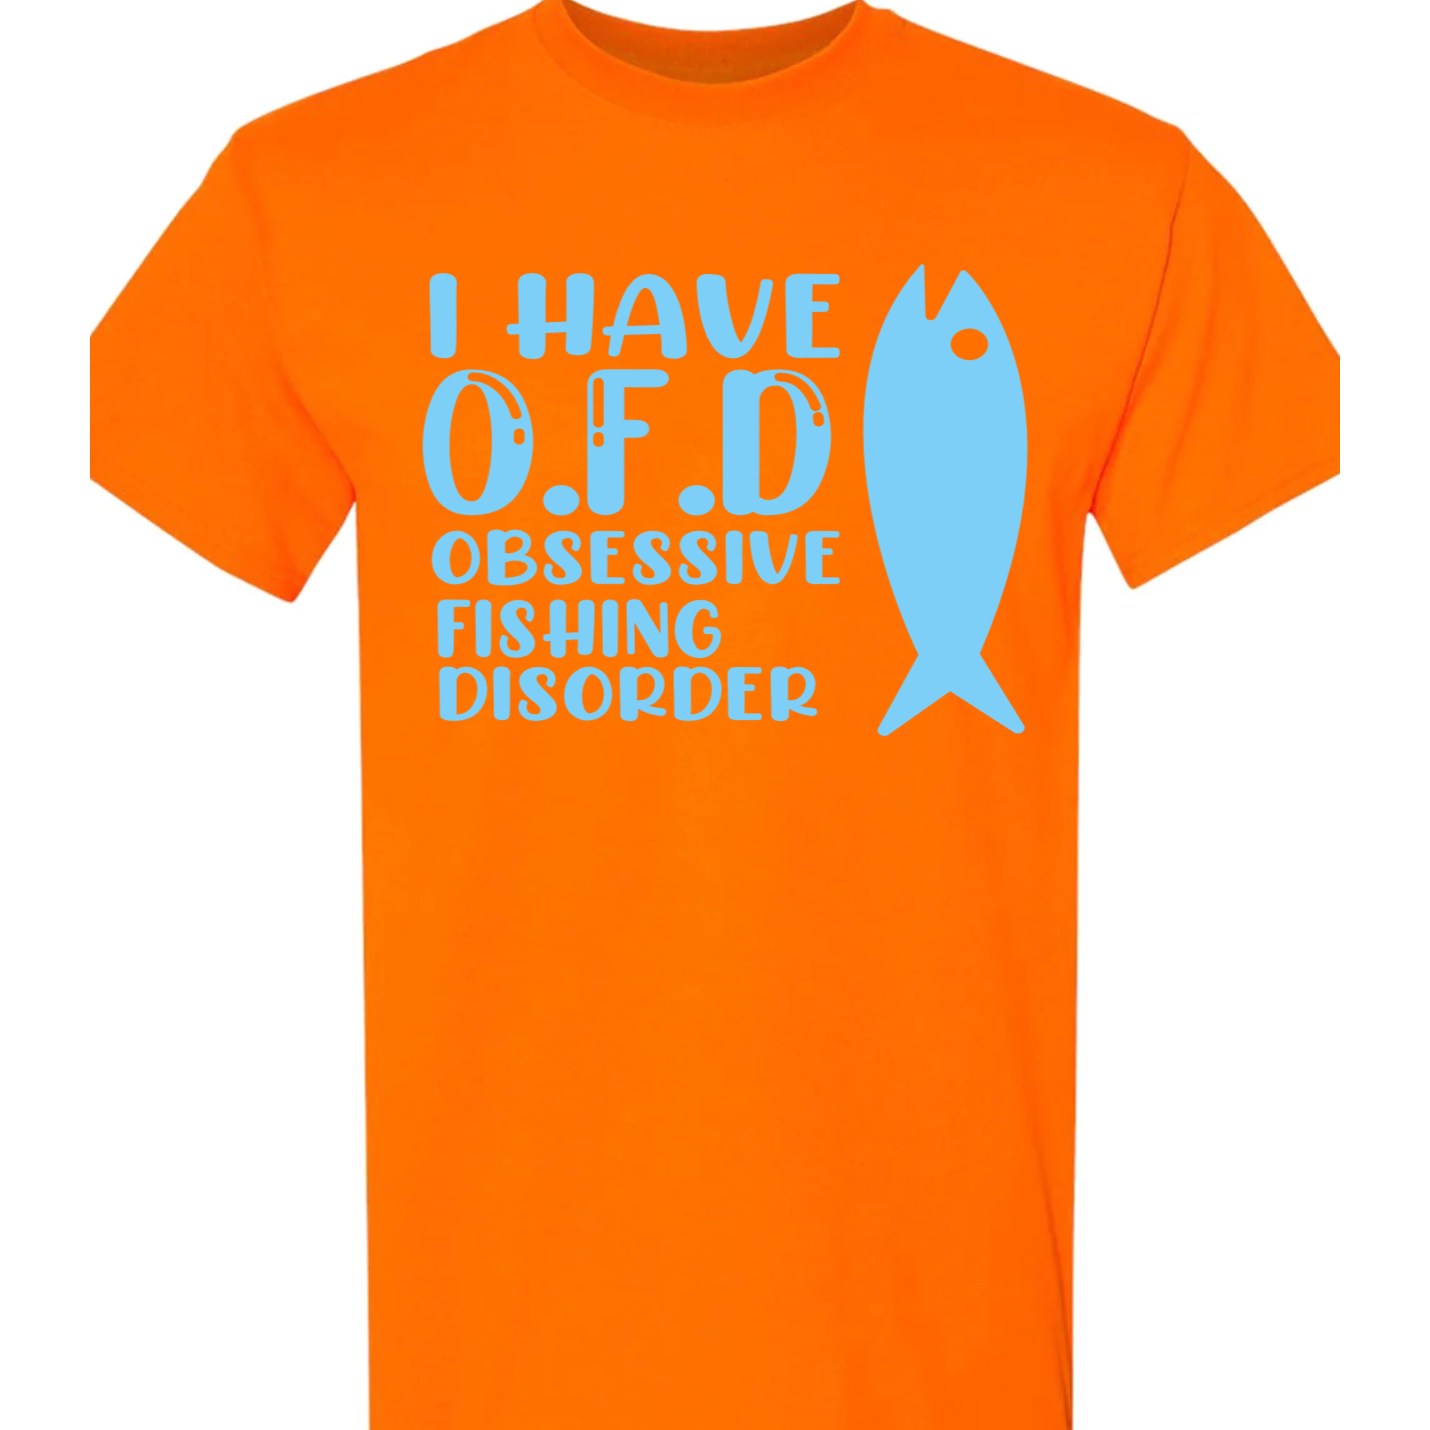 Obsessive Fishing Disorder Vinyl Graphic for Shirts